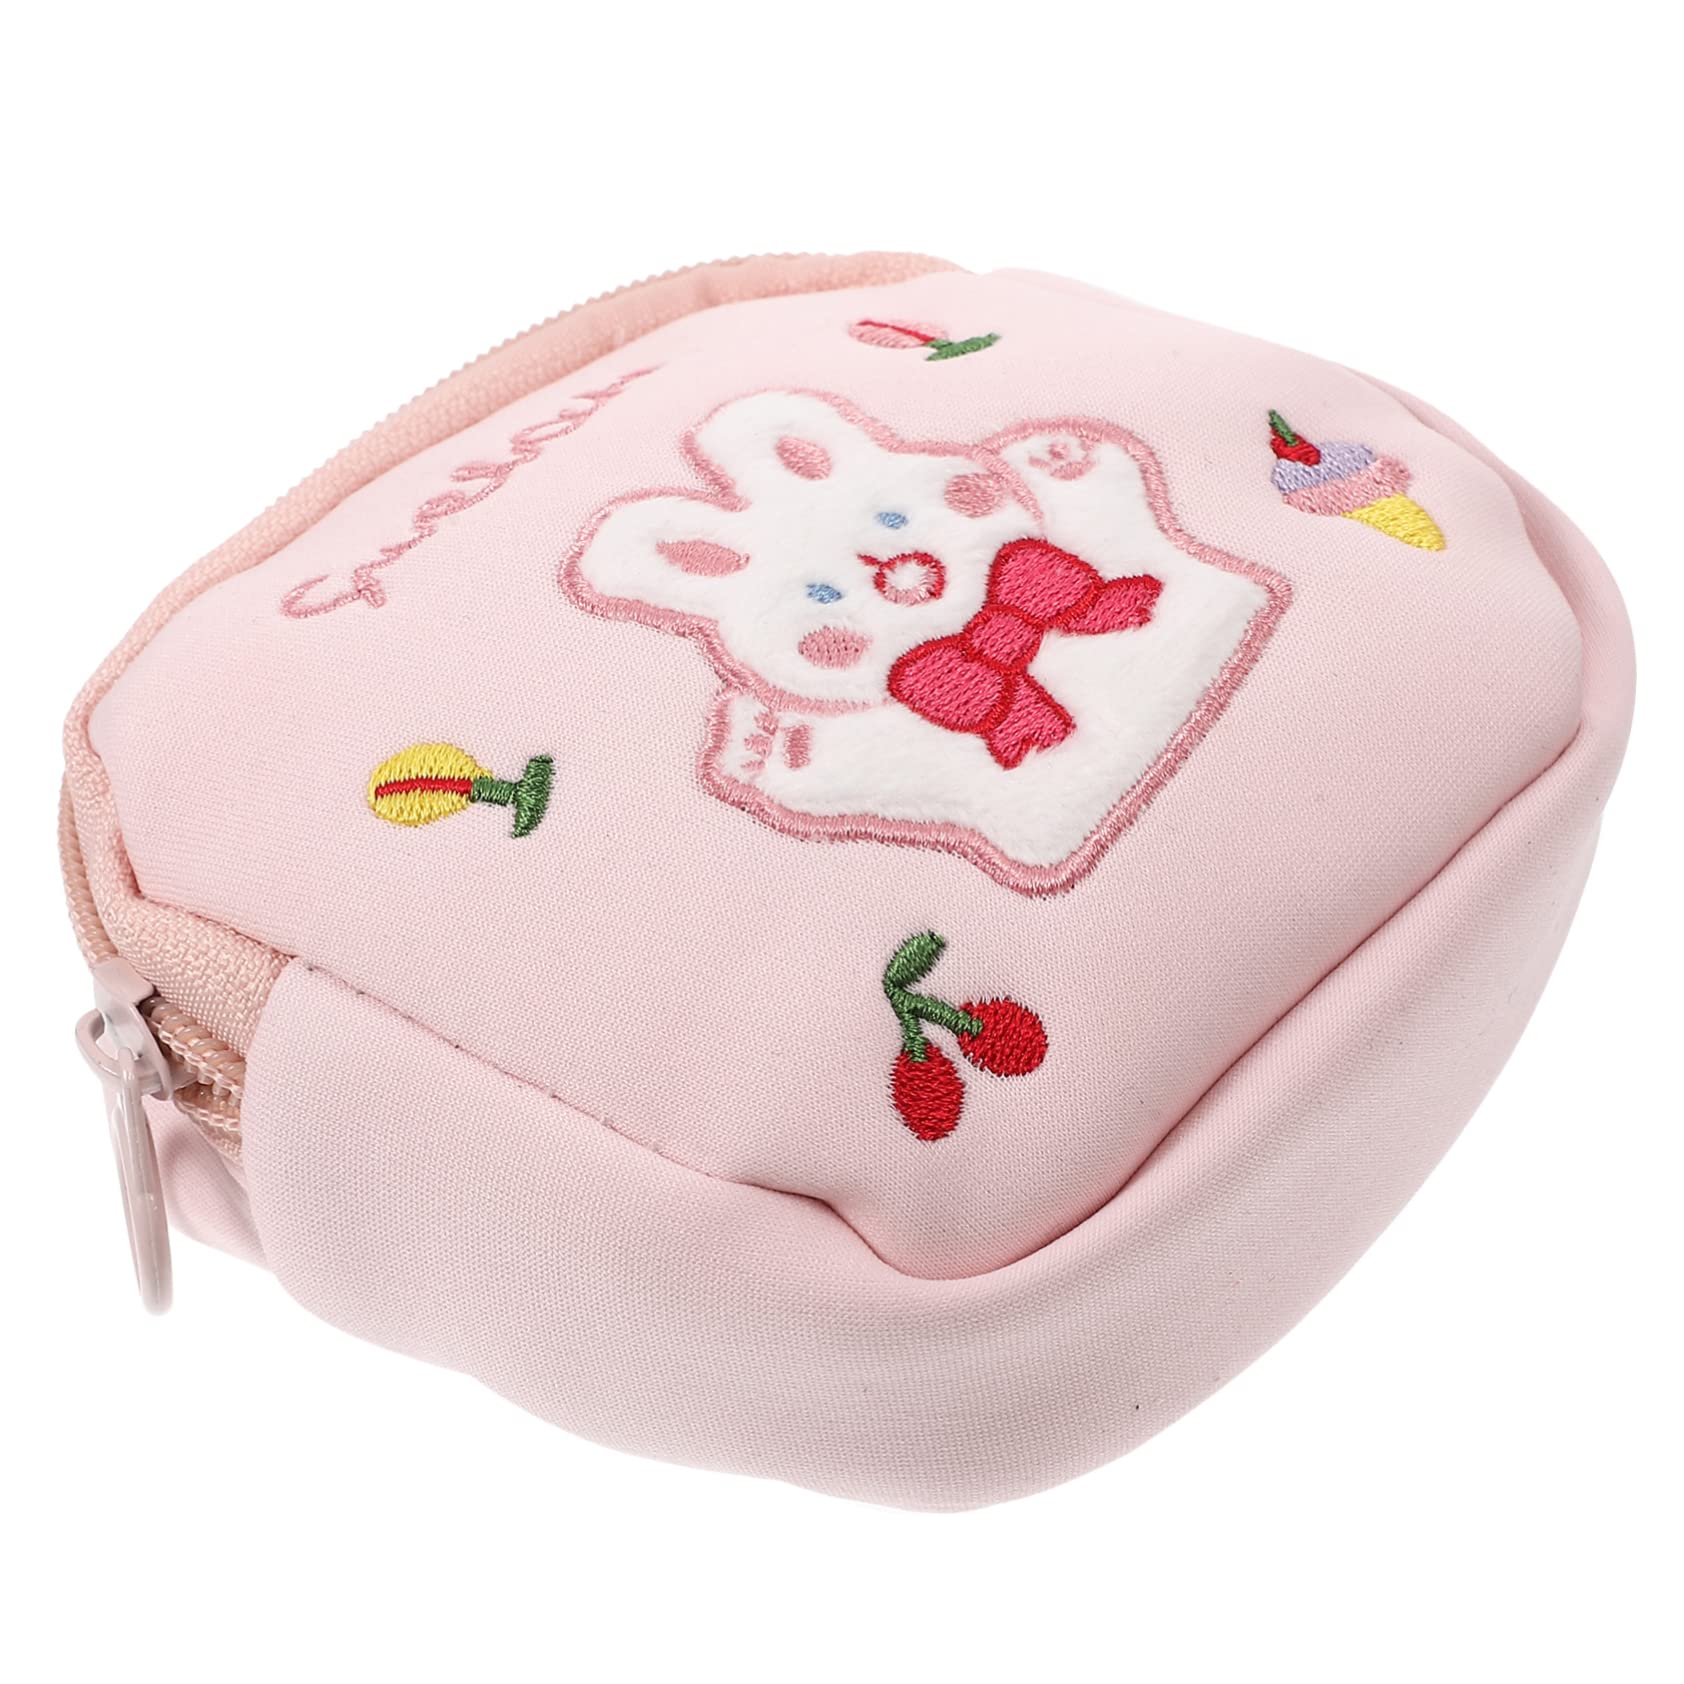 Period Pouch Portable Tampon Storage Bag,Tampon Holder for Purse Feminine  Product Organizer,Red Japanese Style Floral Pattern